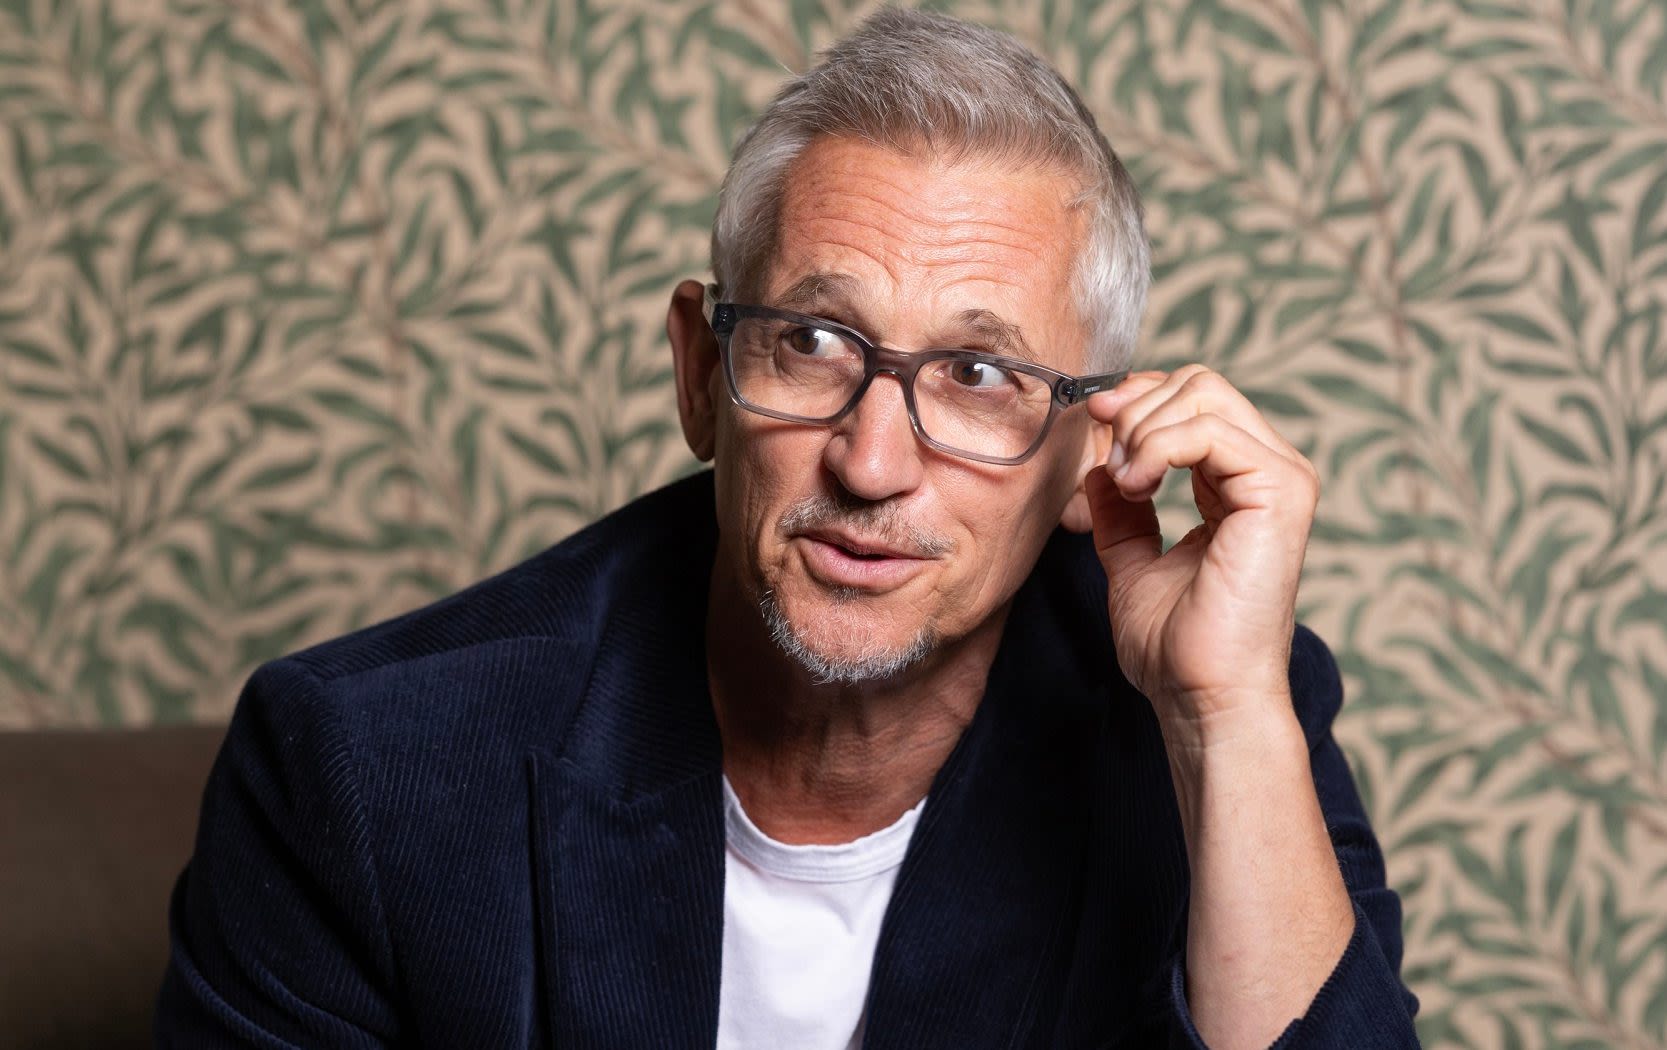 Watch: Gary Lineker appears to call Oct 7 attacks ‘the Hamas thing’